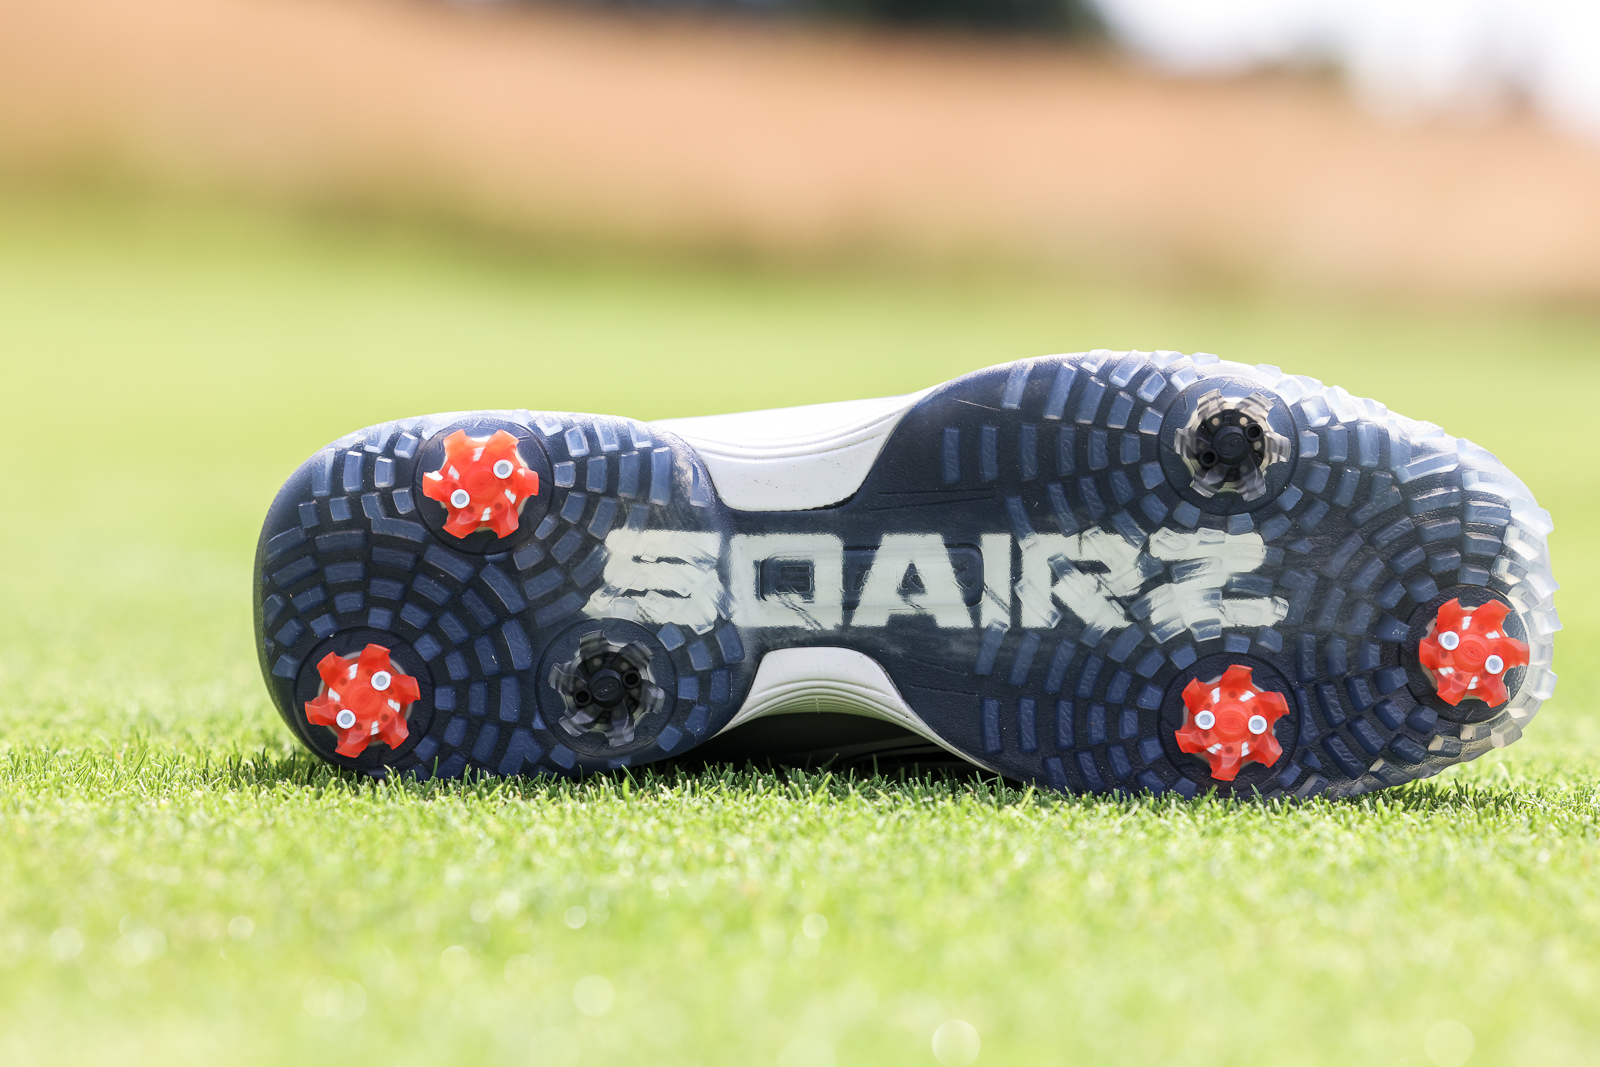 Squairz Speed Golf Shoes sole